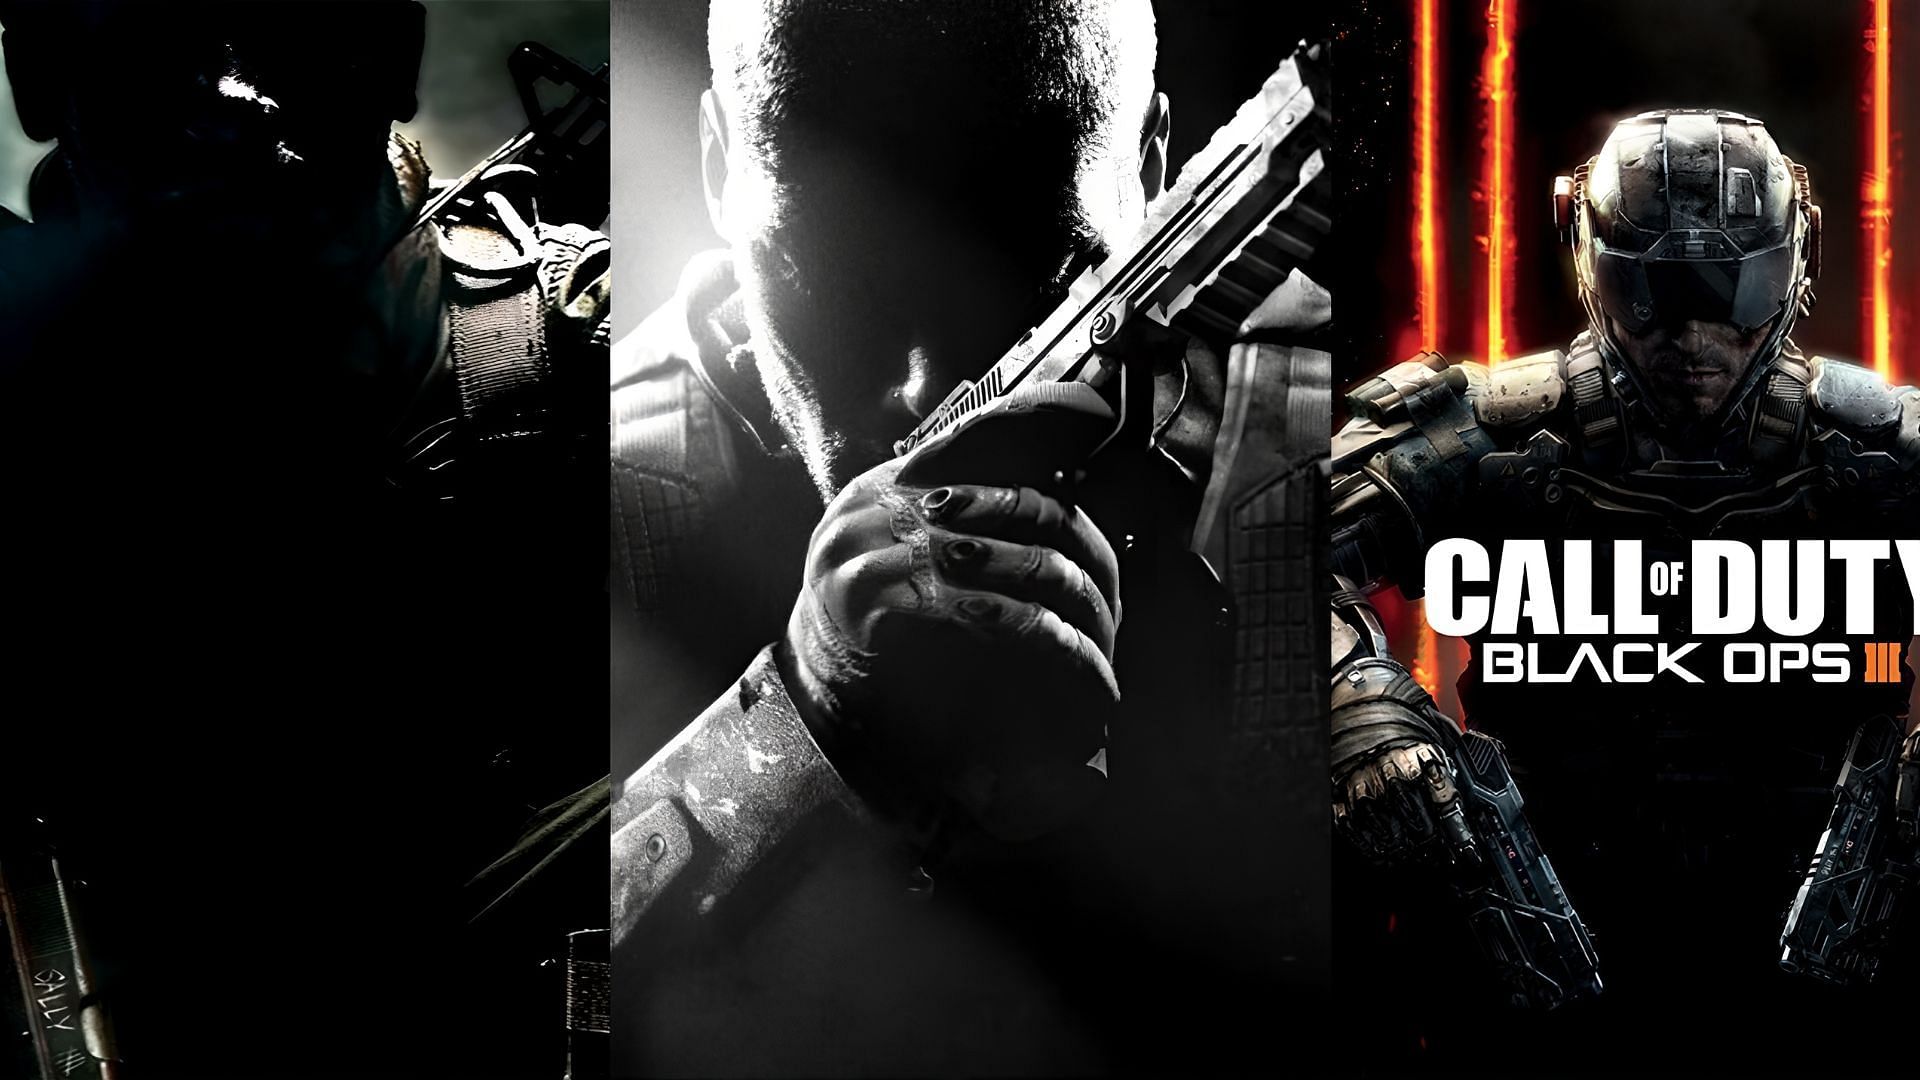 The Call of Duty: Black Ops series freatures 5 titles widely acclaimed titles and one latest addition which is scheduled for reveal on June 9, 2025, in Xbox showcase , Call of Duty: Black Ops